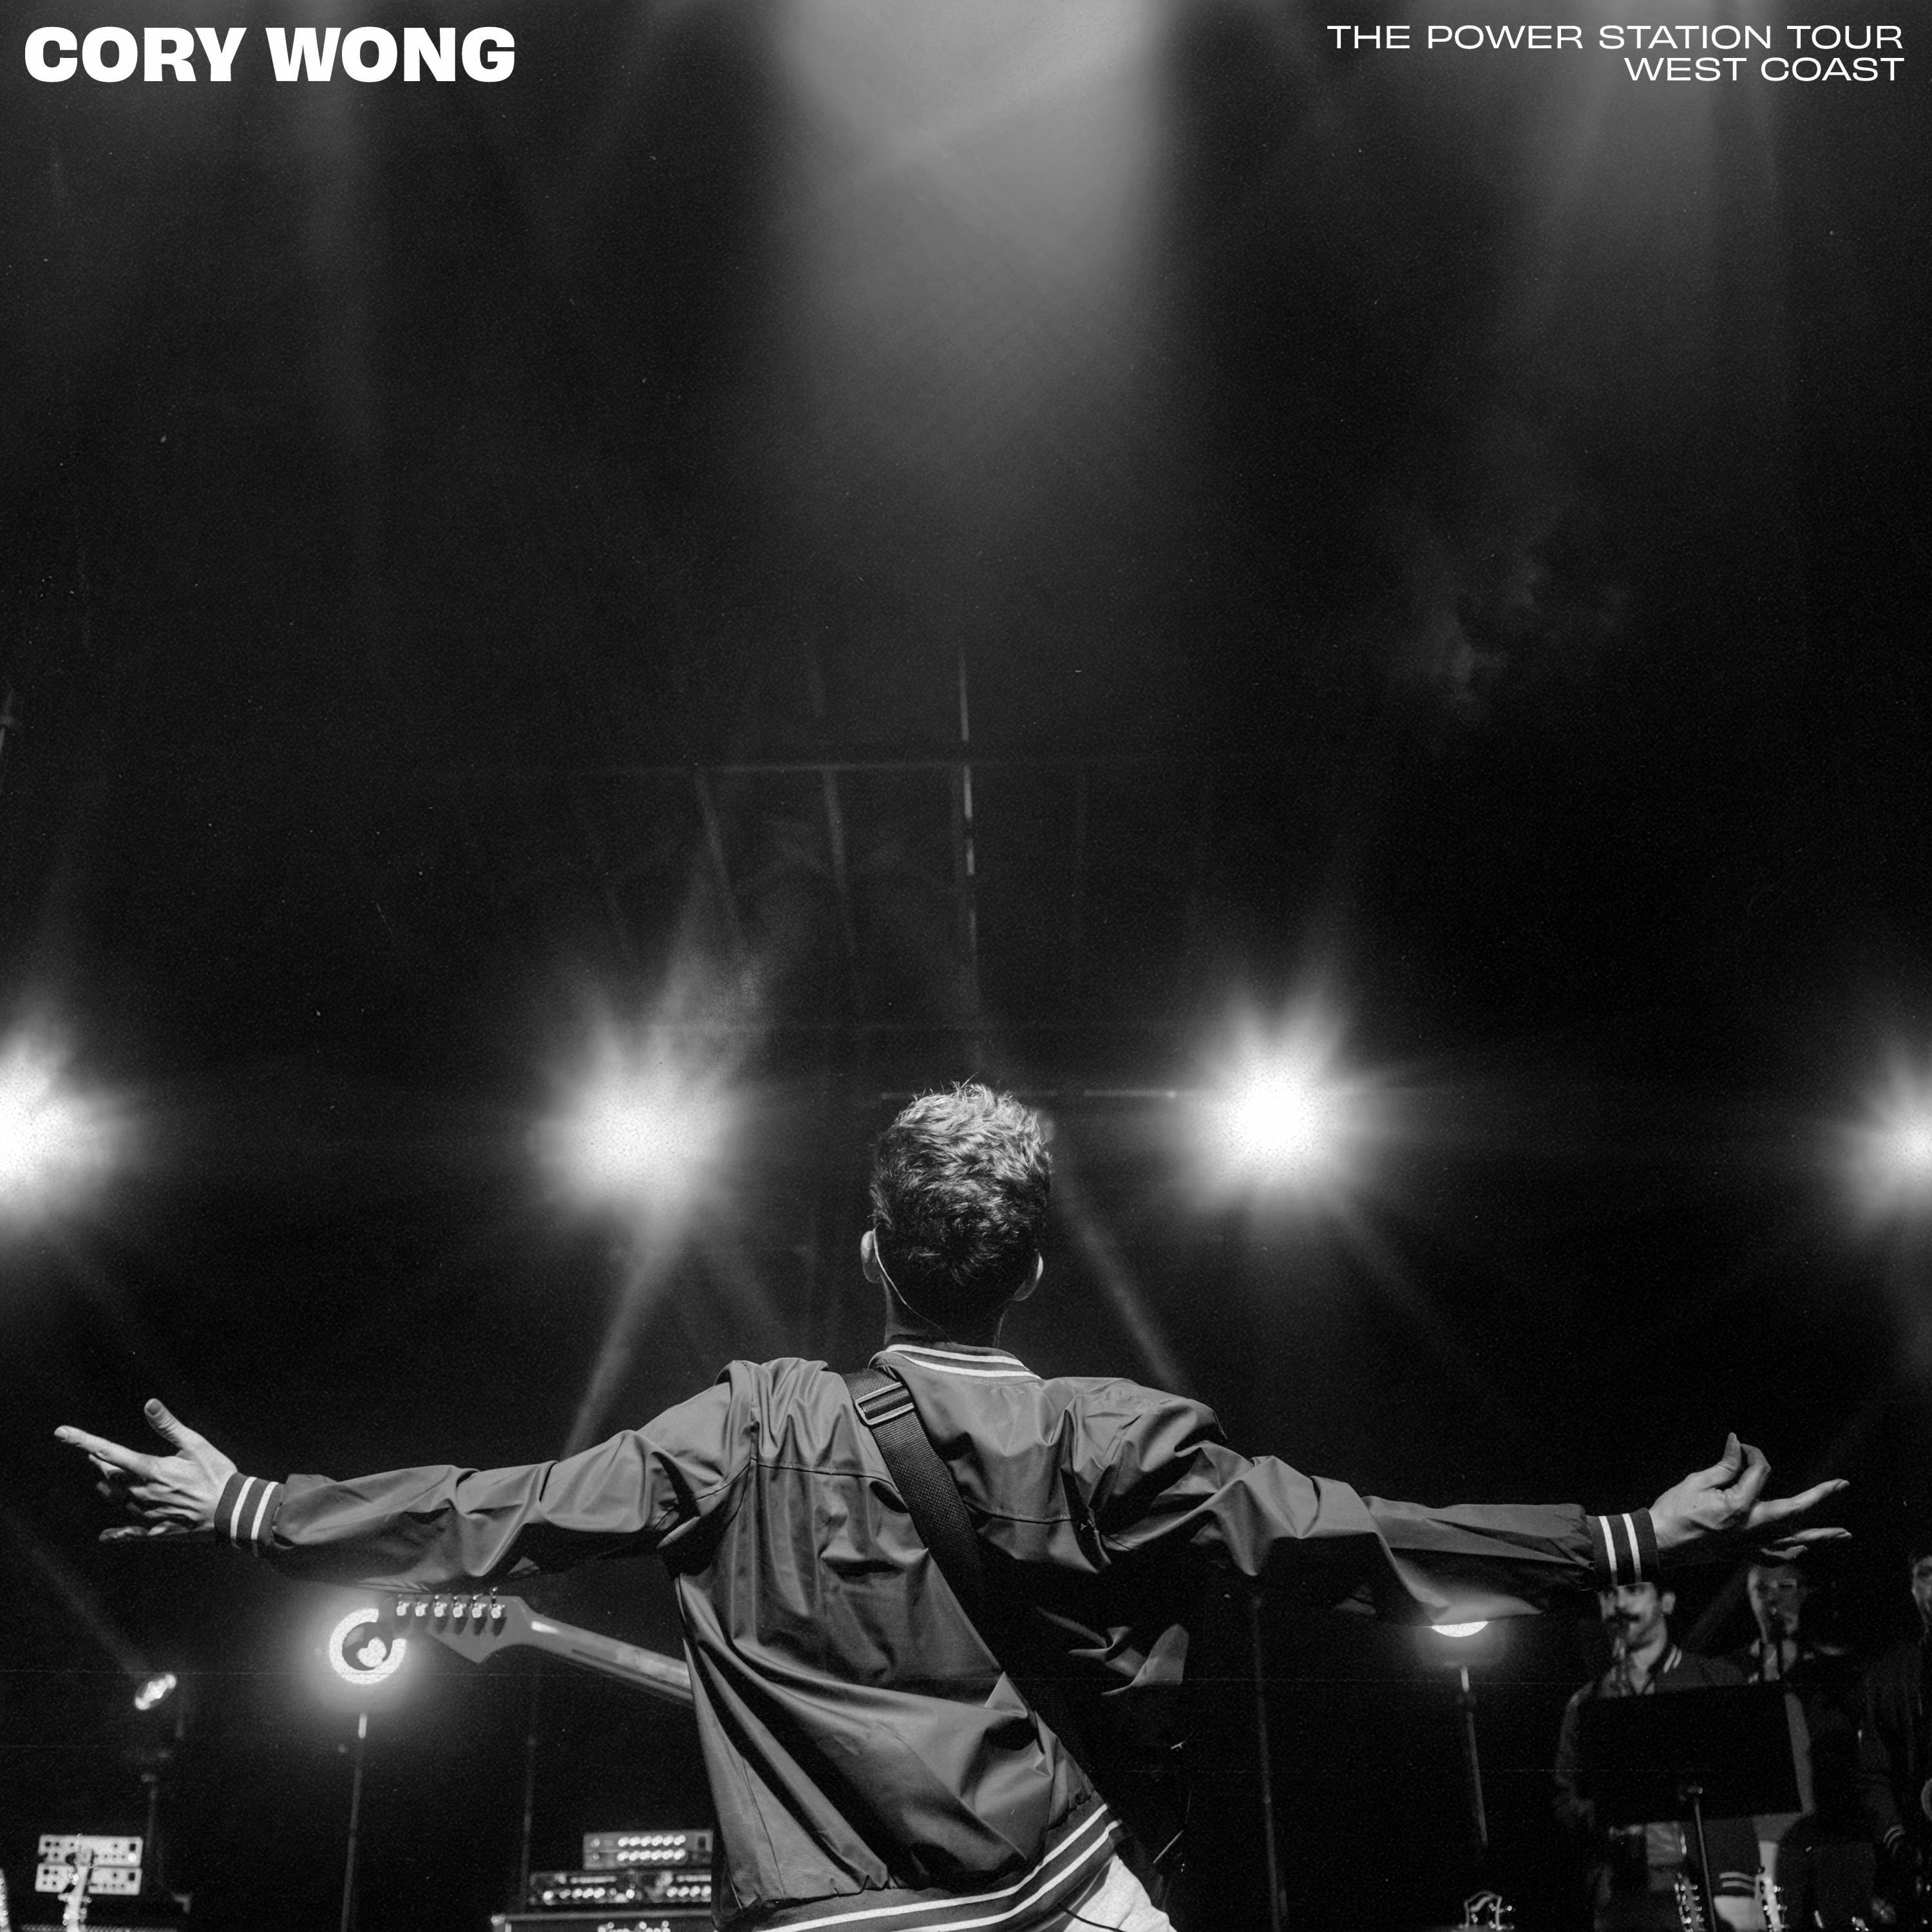 Cory Wong - Team Sports (The Power Station Tour Live)